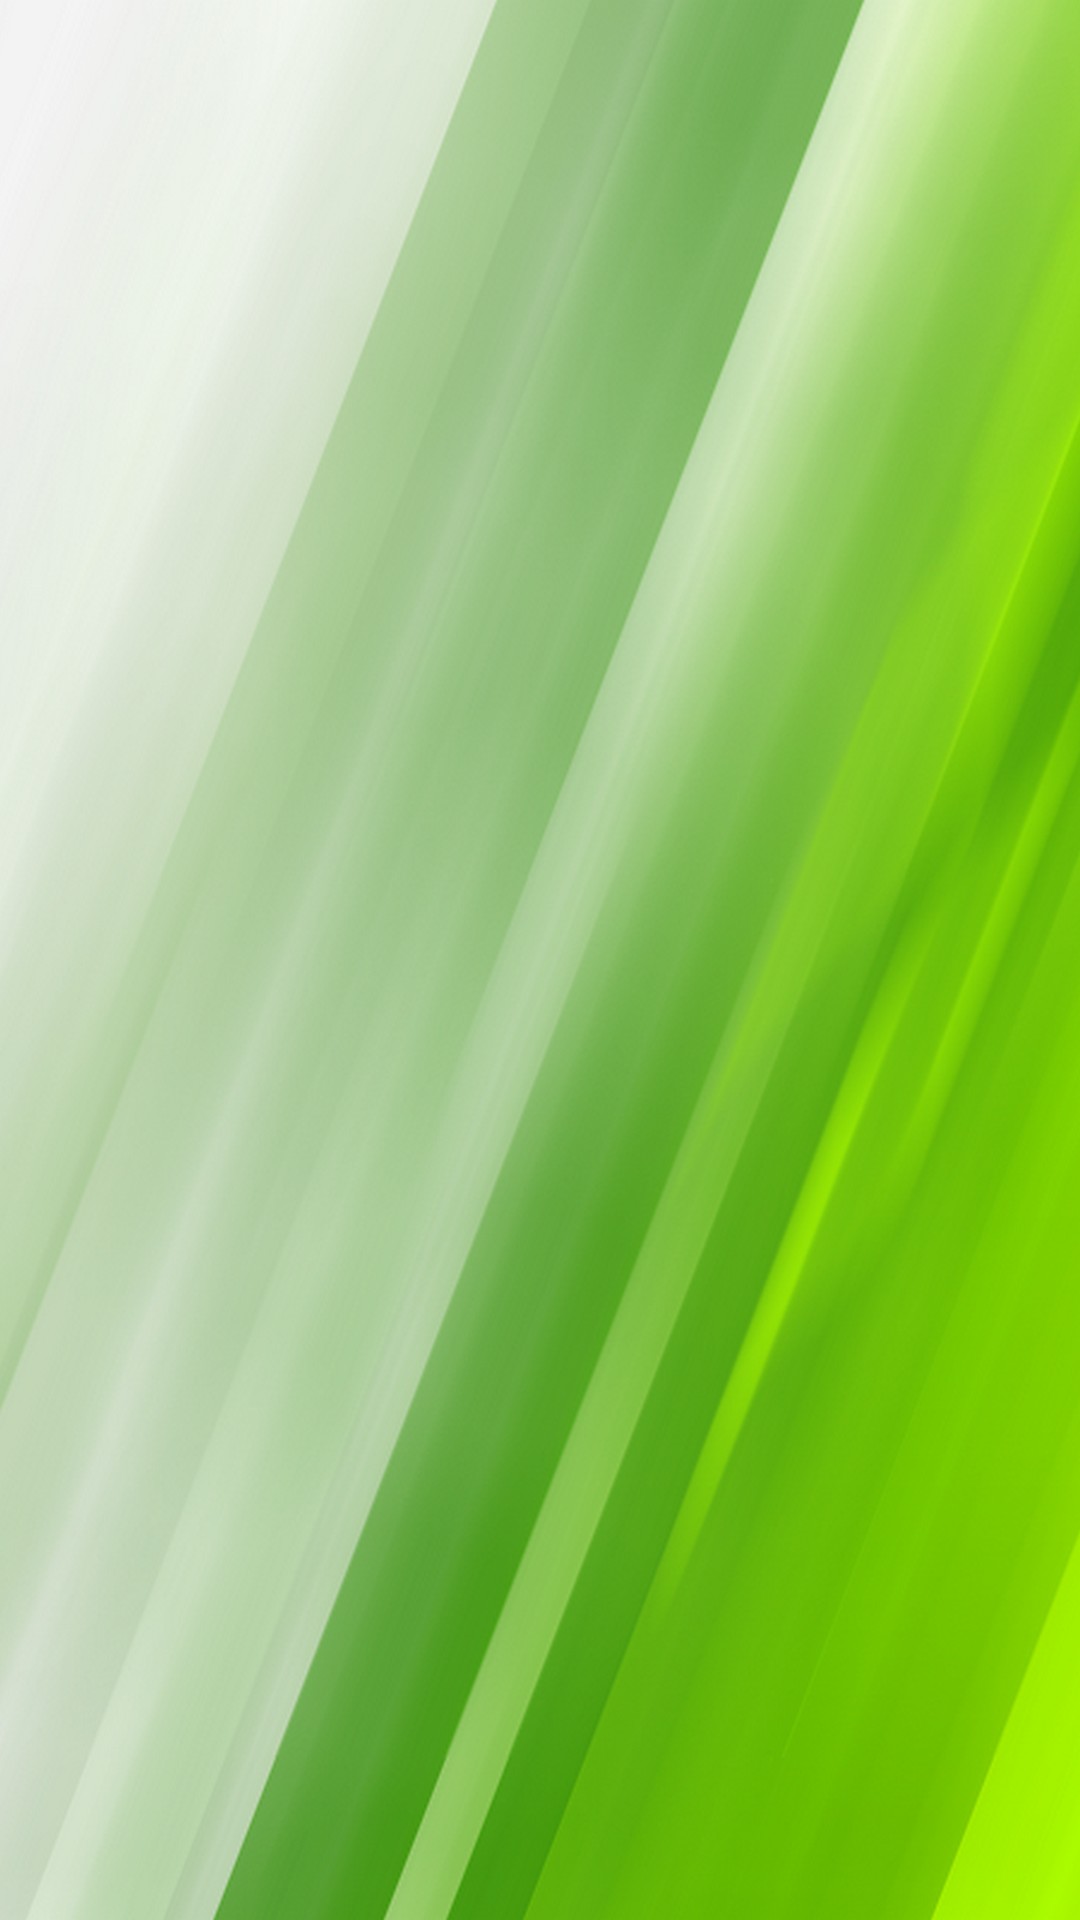 Green Colour Android Wallpaper with image resolution 1080x1920 pixel. You can make this wallpaper for your Android backgrounds, Tablet, Smartphones Screensavers and Mobile Phone Lock Screen